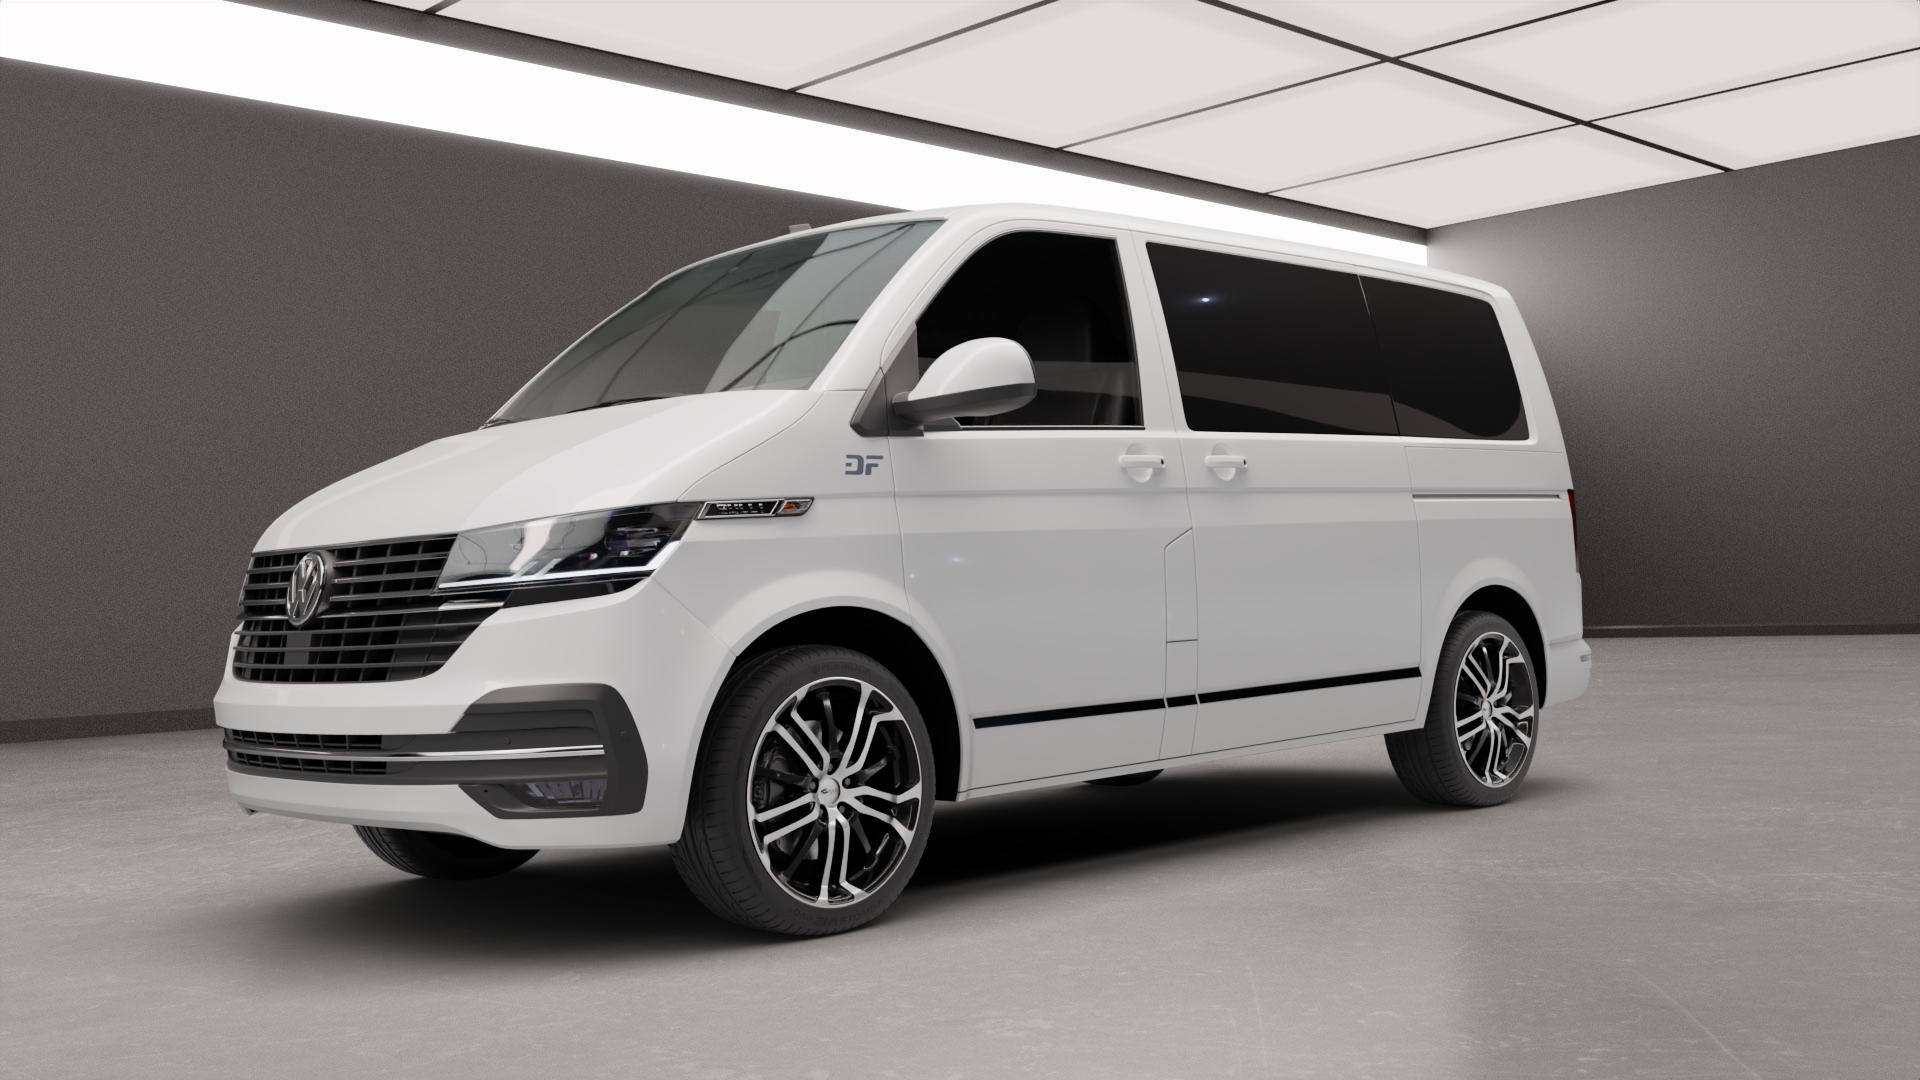 Volkswagen (VW) T6.1 Multivan 2,0l TDI 4Motion 146kW (199 hp) Wheels and  Tyre Packages | velonity.com